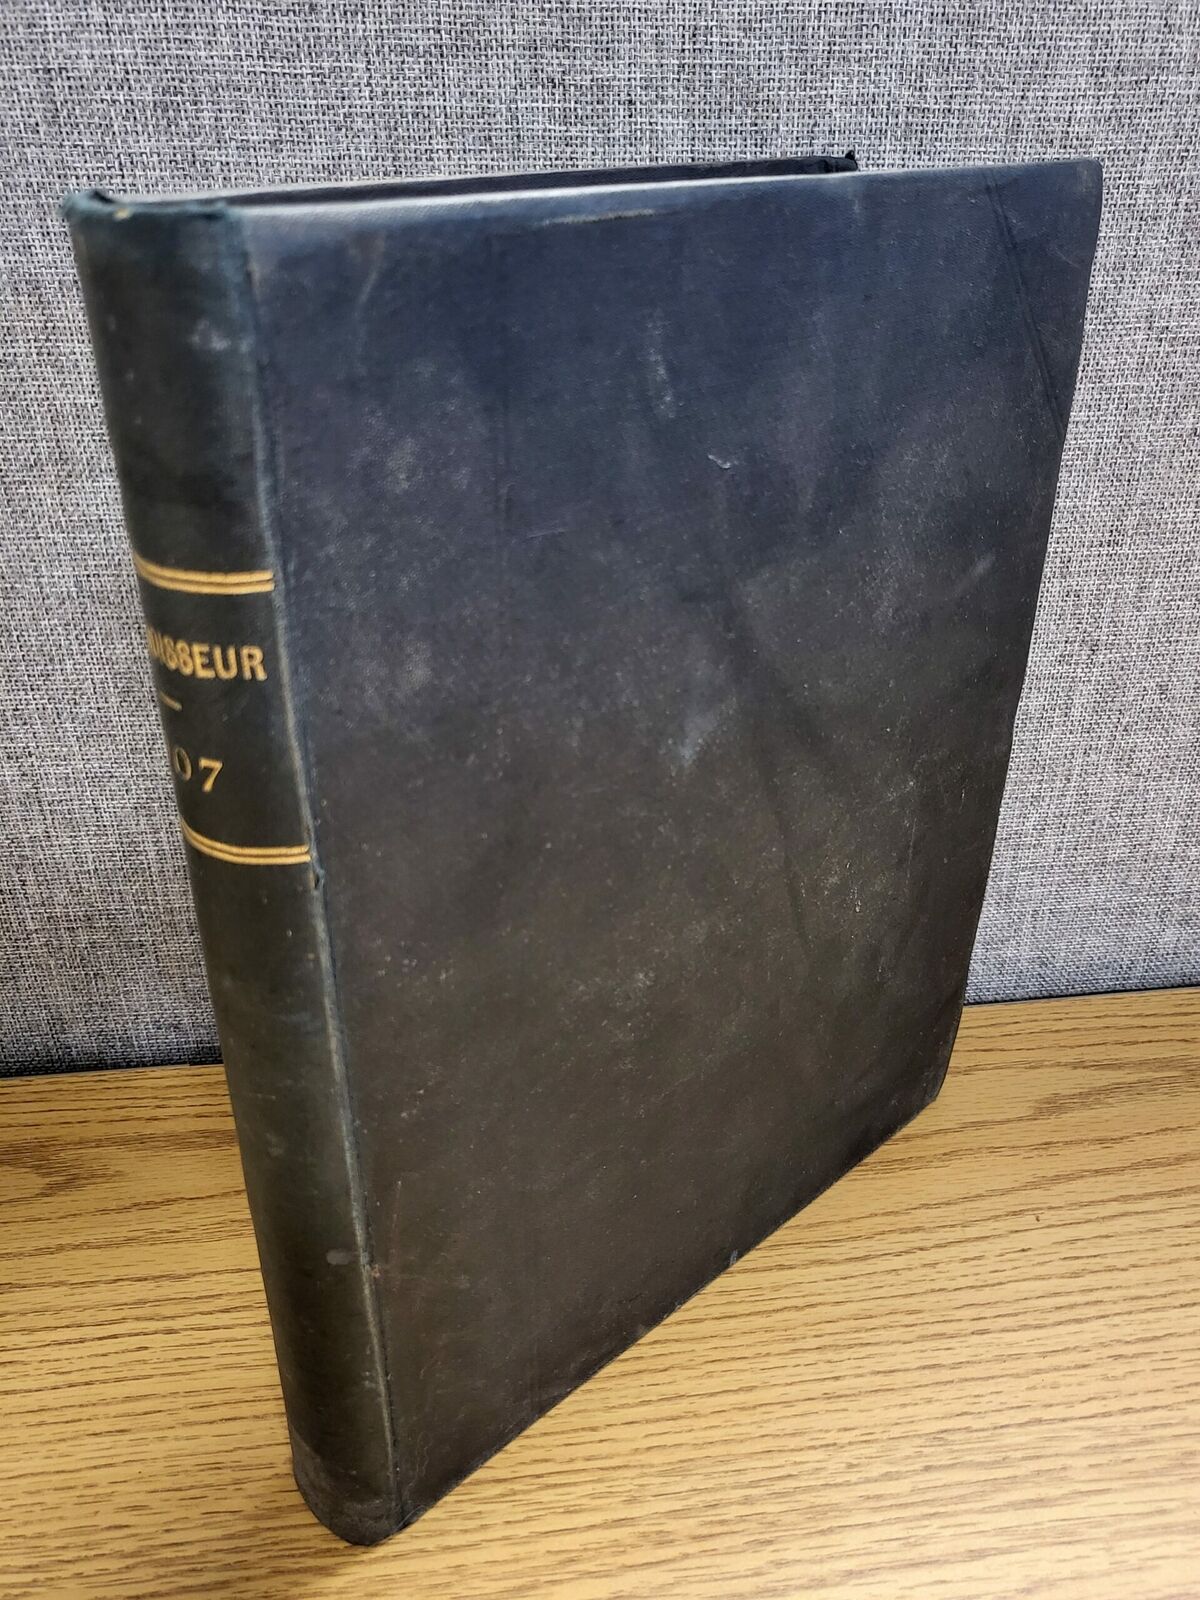 The Connoisseur Magazine 1907 and 1911 2 volumes bound